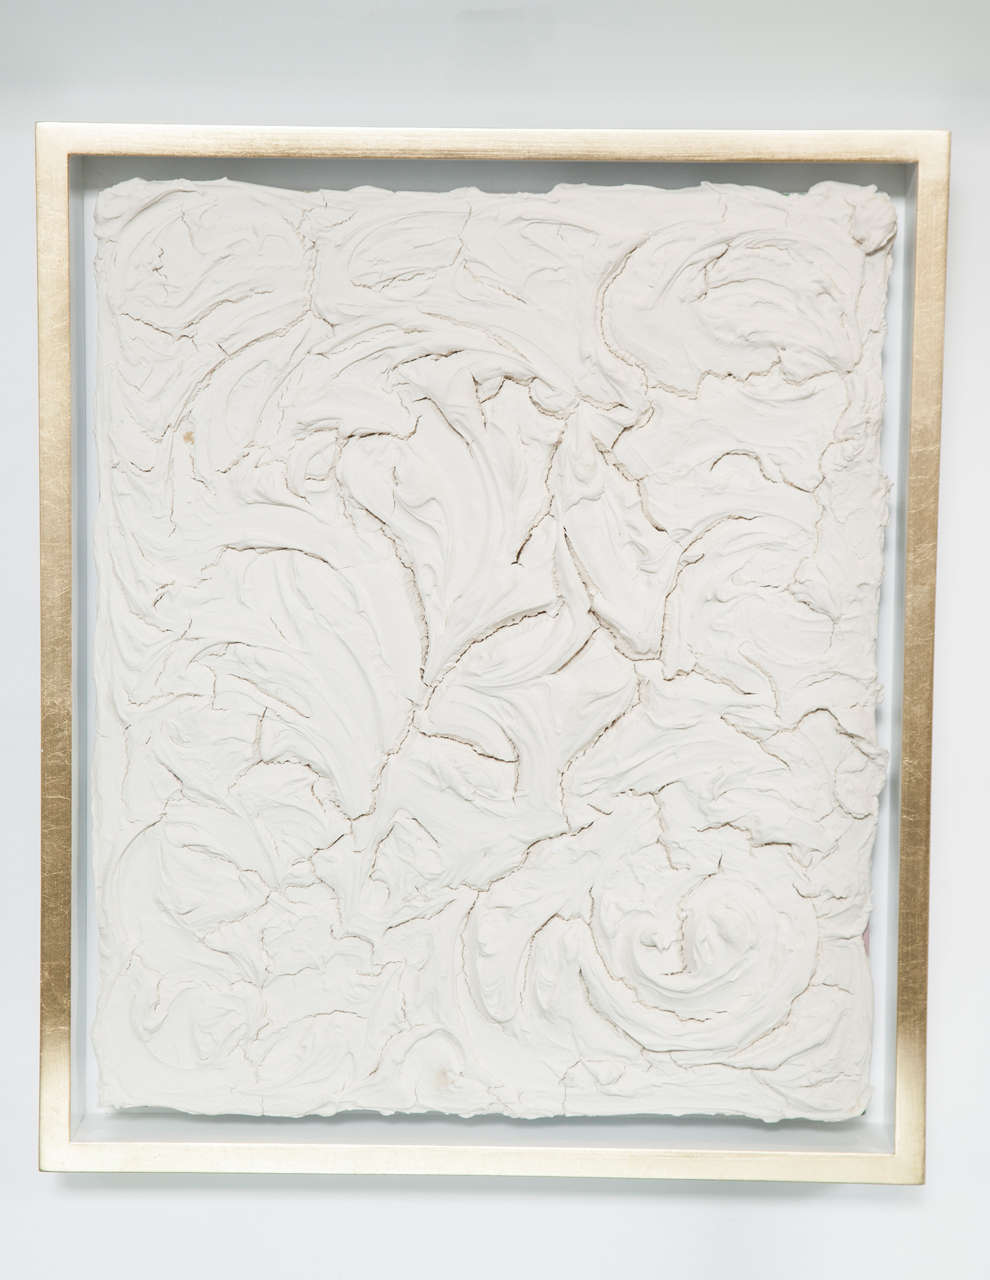 Contemporary artist Peter Buchman's 'White Texture' is made of joint compound, plaster, paint on wood and a white edge/gold leaf frame. This piece is an attempt at controlling the uncontrollable. Or is the artist being somewhat autobiographical? How